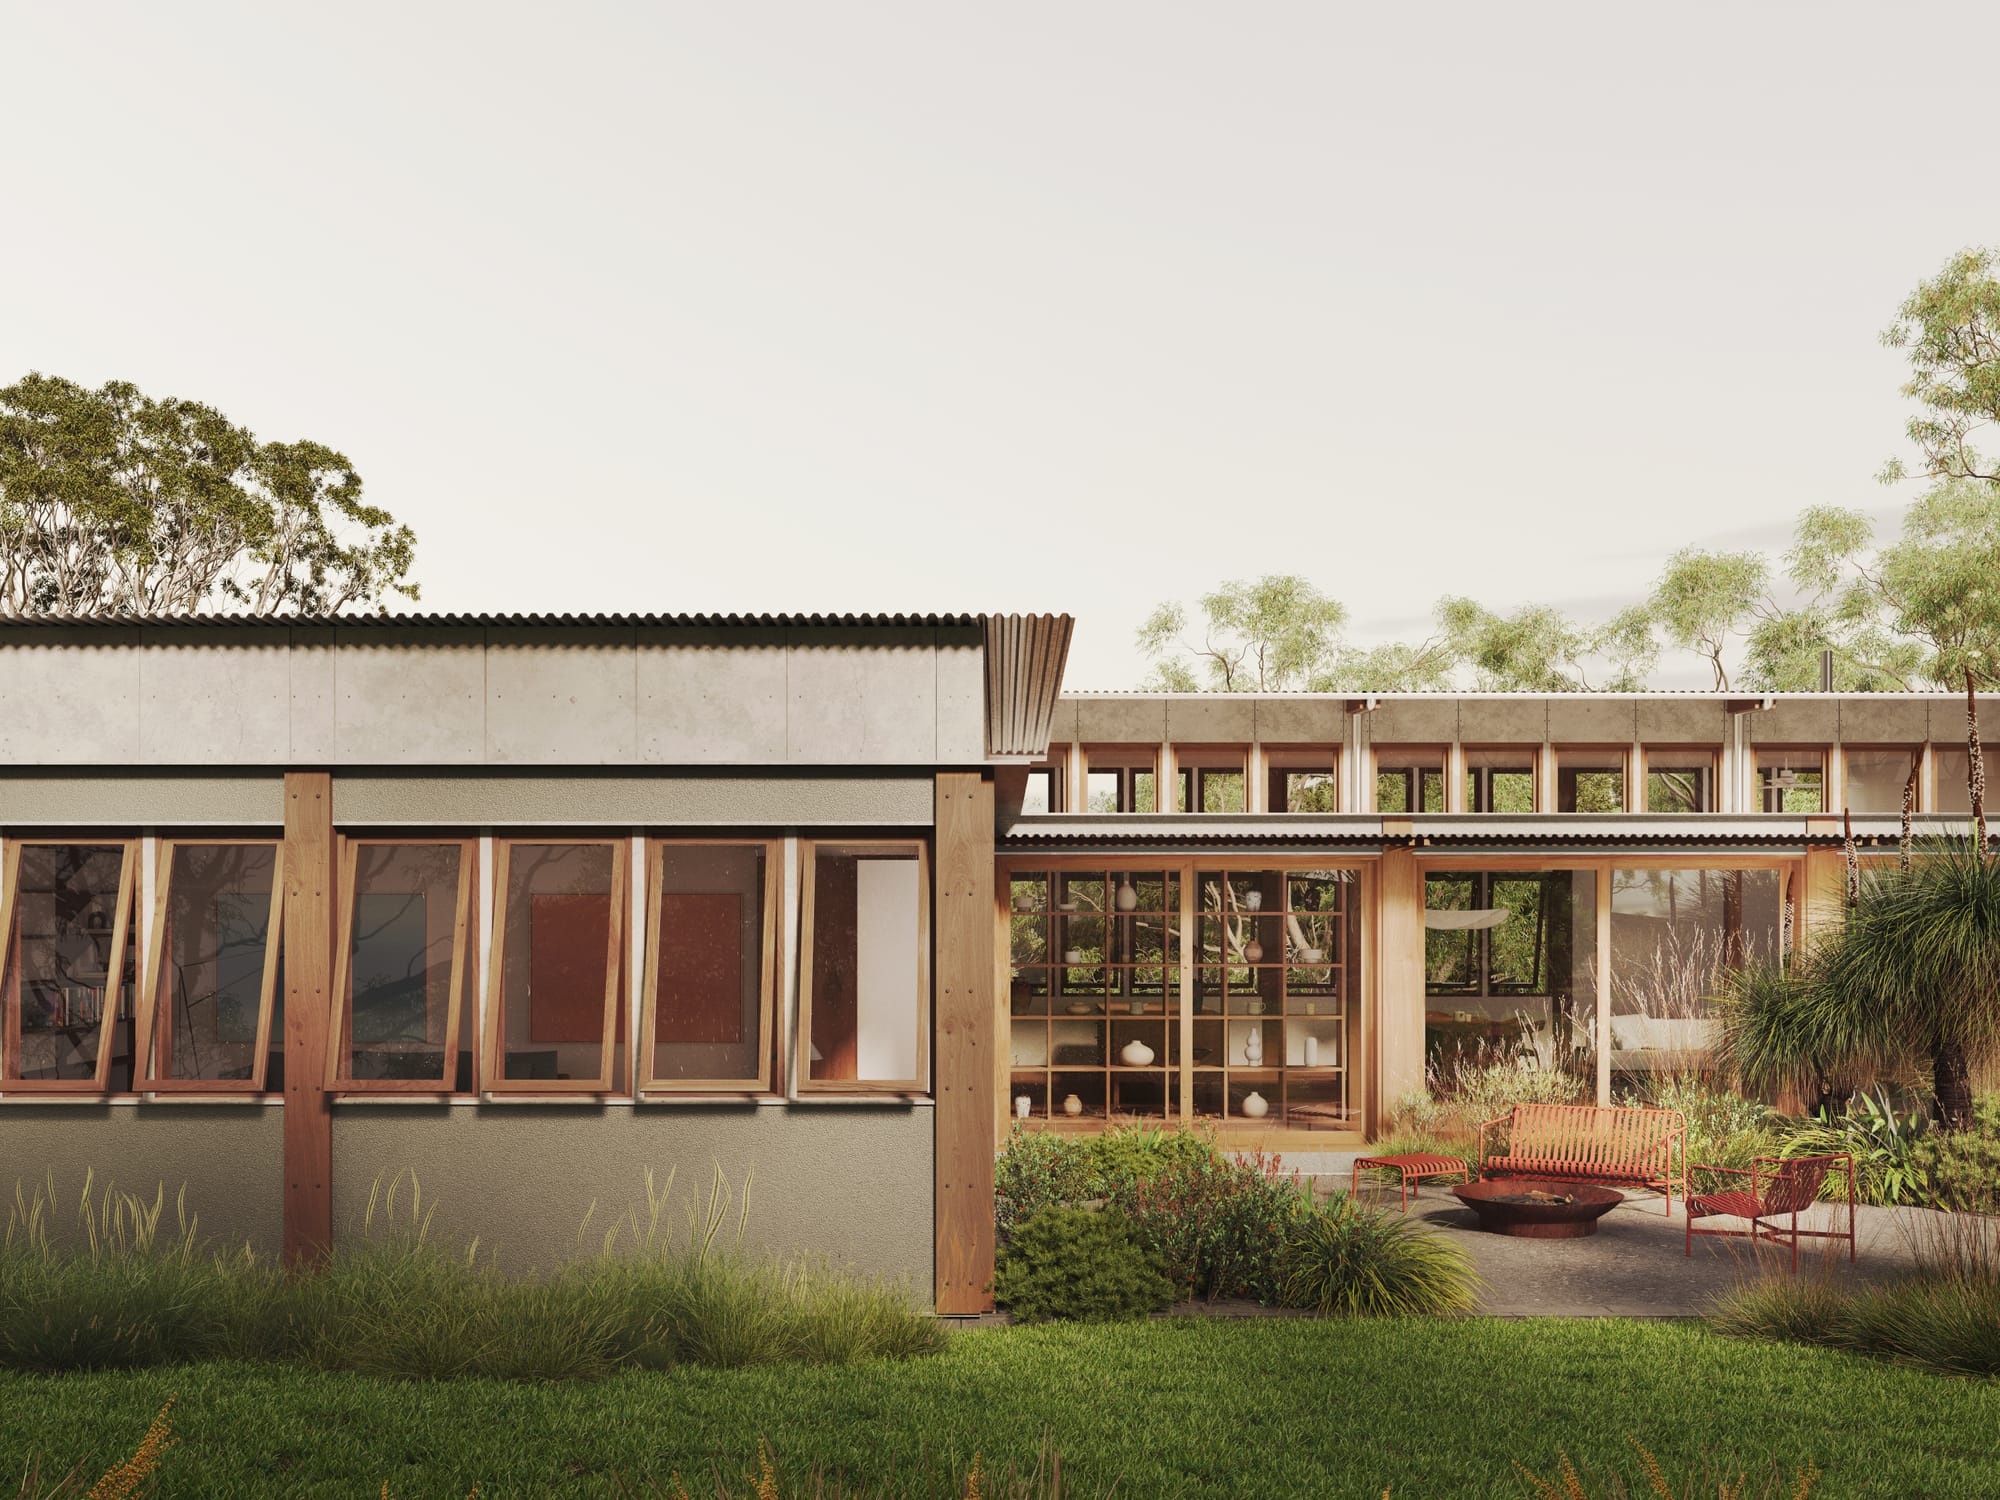 Mulloway House. Renders copyright of CHOIRENDER. Exterior of home with timber details. Circular concrete courtyard to left of main structure.